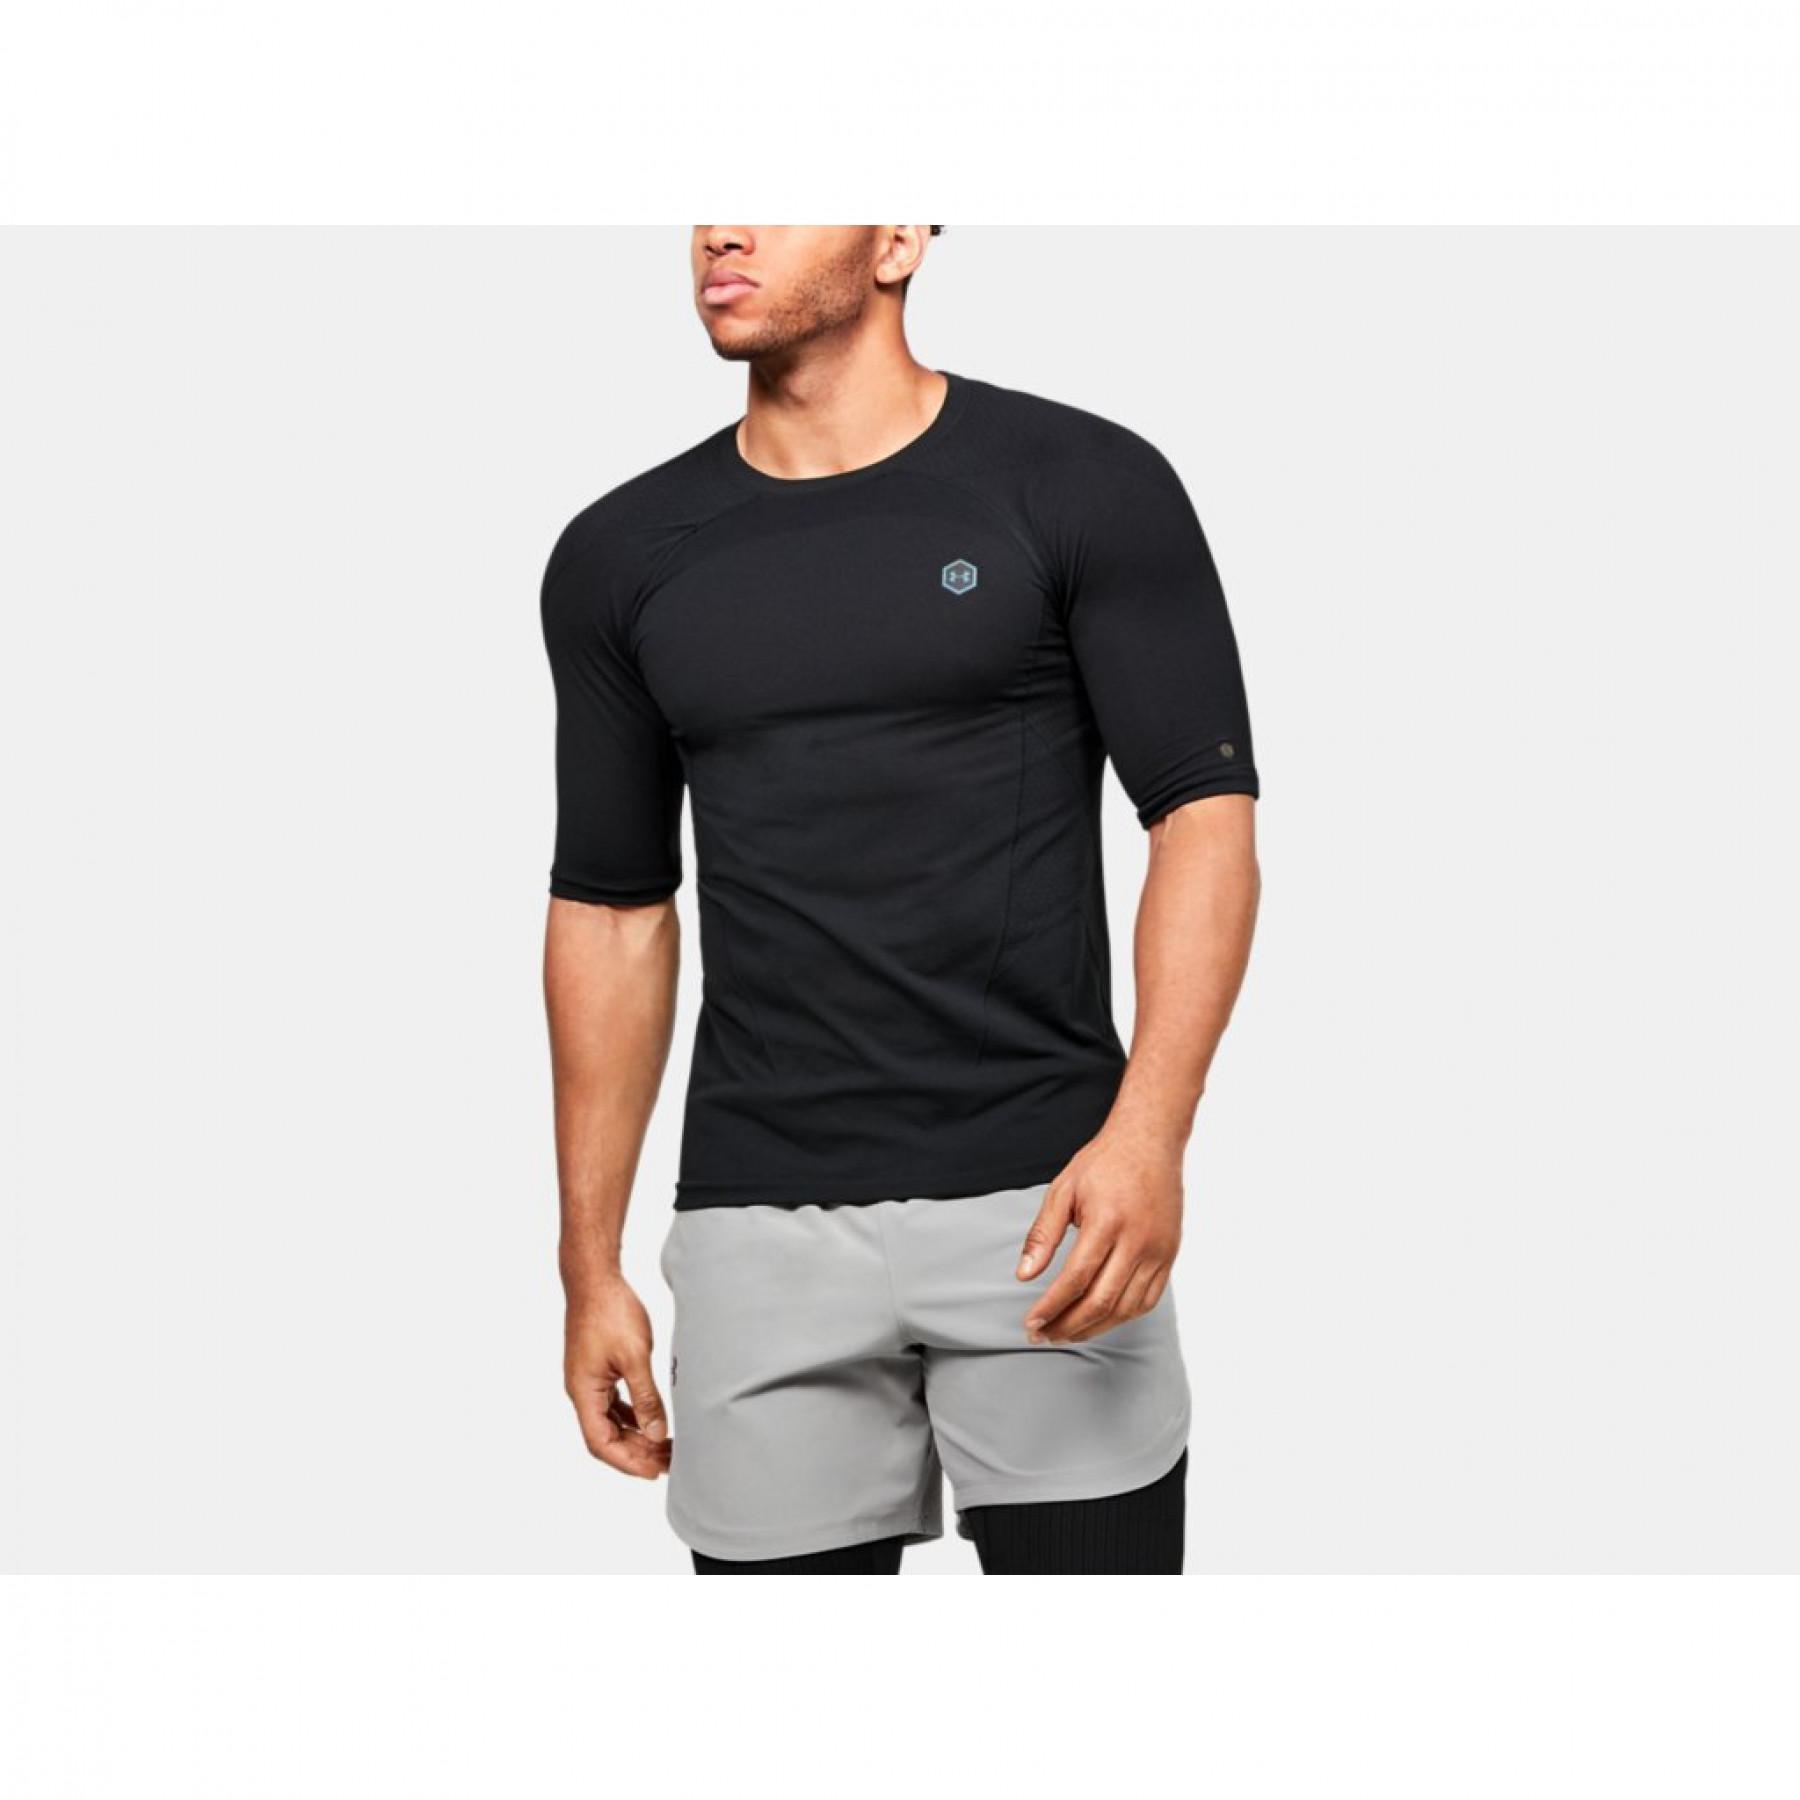 Compression T-shirt Under Armour RUSH™ Seamless - Compression garments -  Protections - Equipment